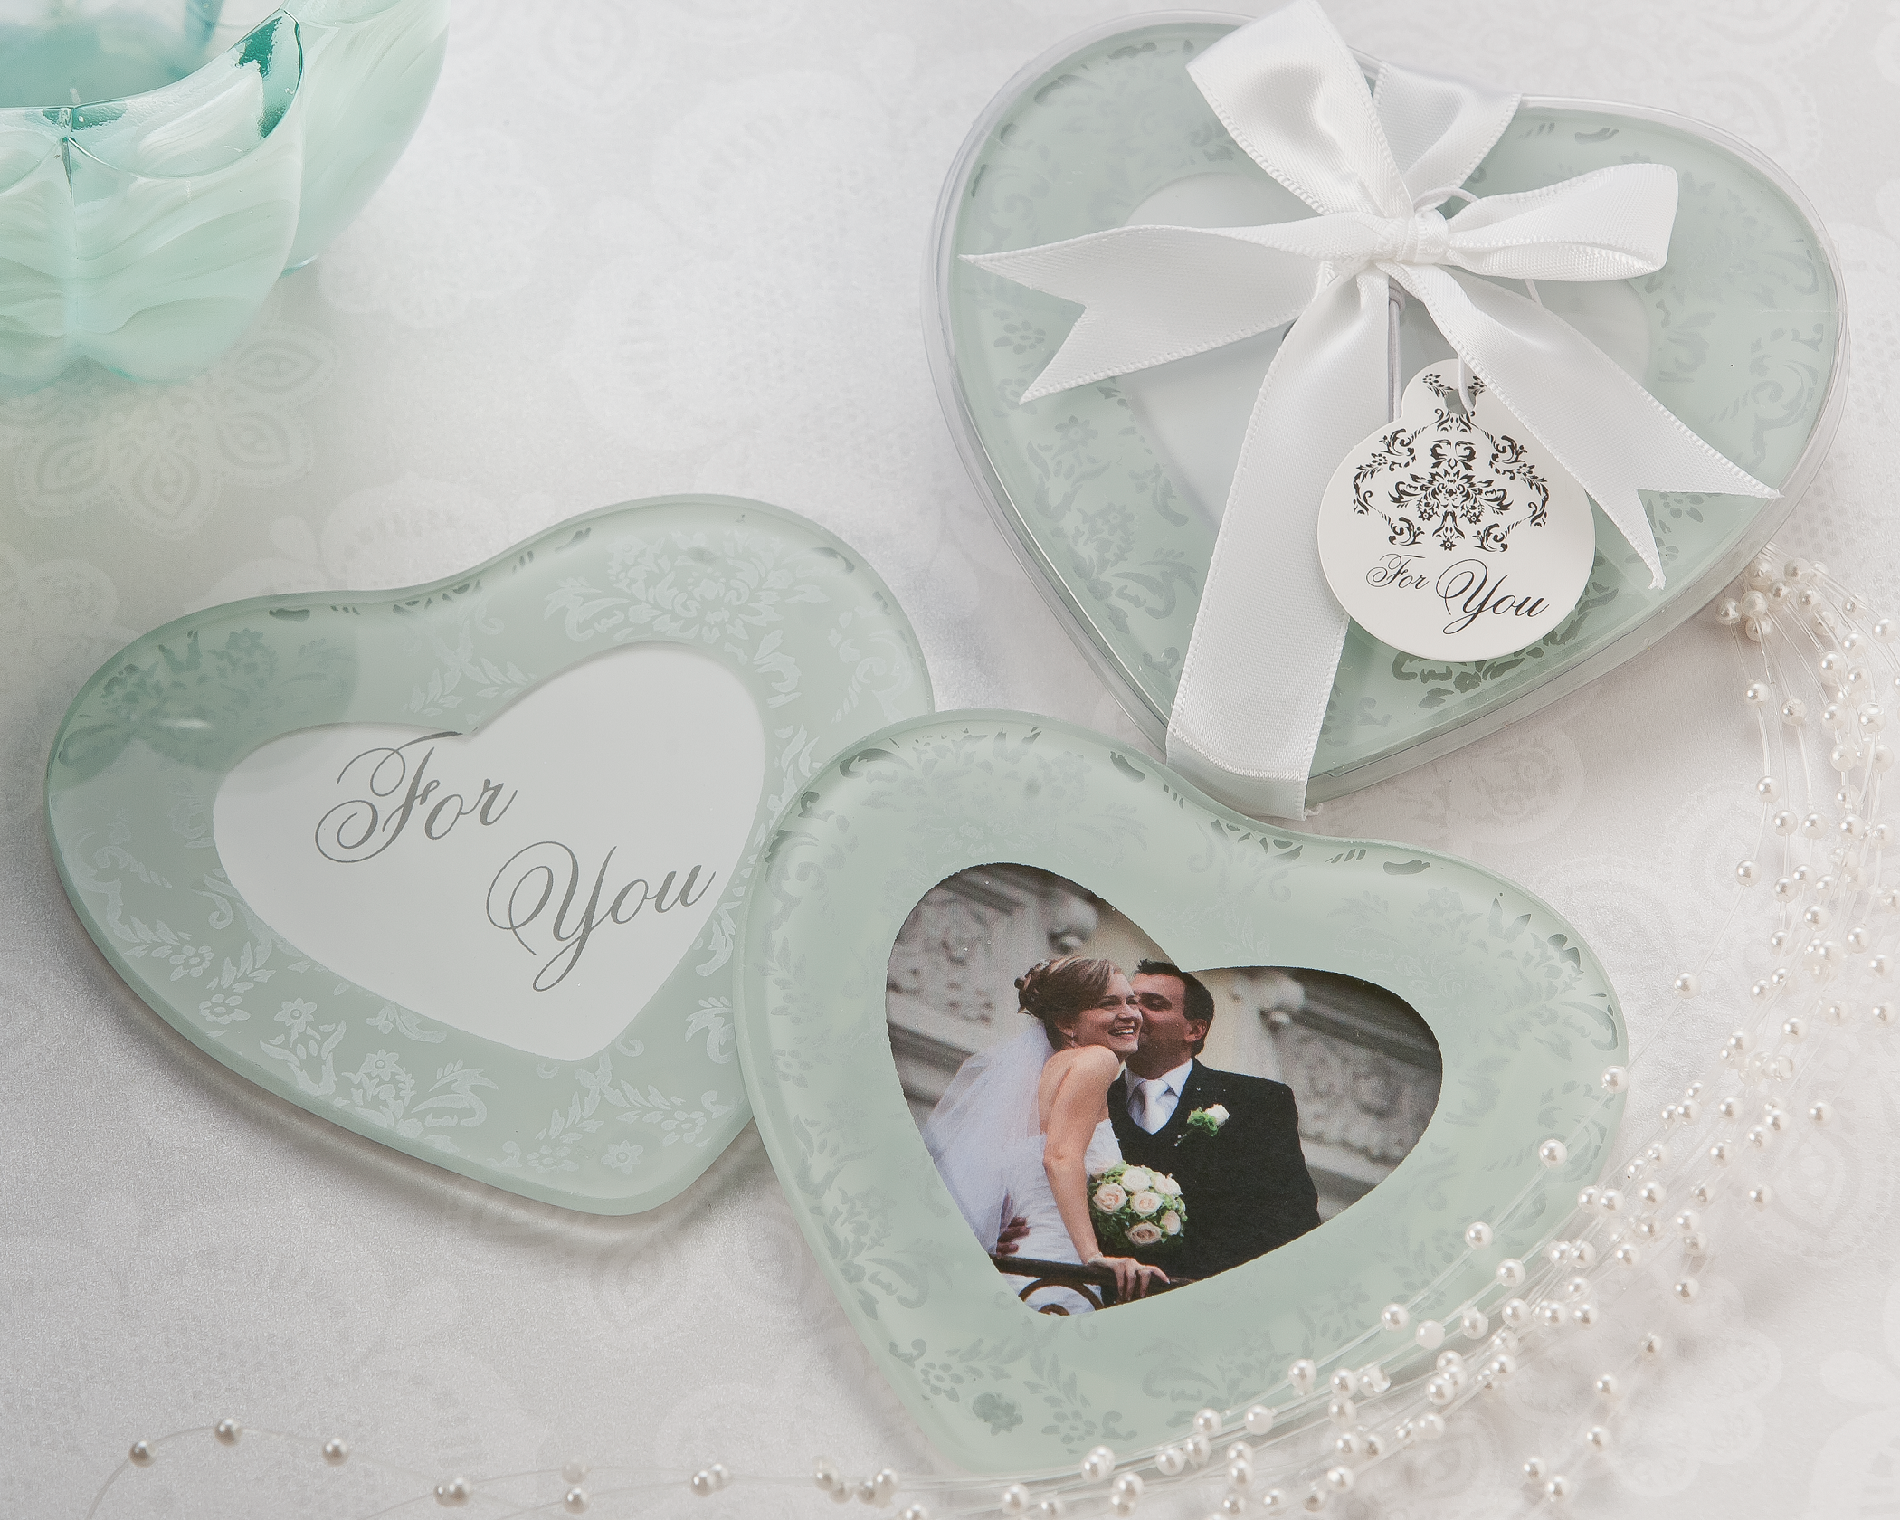 "Heartfelt Memories" Frosted Heart Photo Coasters (Set of 2) [Case Pack of 100]